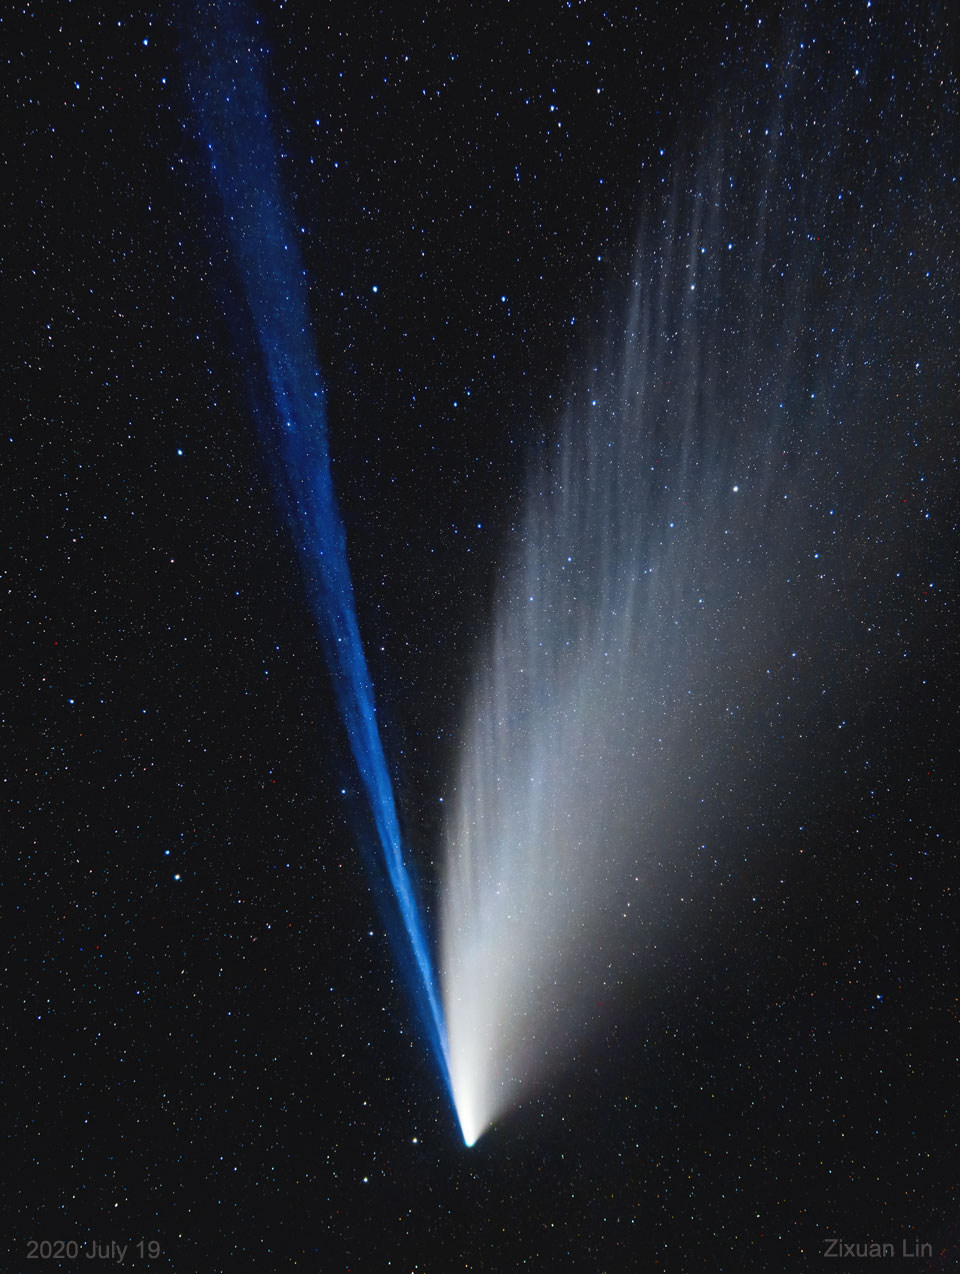 A photo of a comet against a backdrop of stars in space. It looks like it has two split tails: the left one is bright blue and the other is shimmering and white.